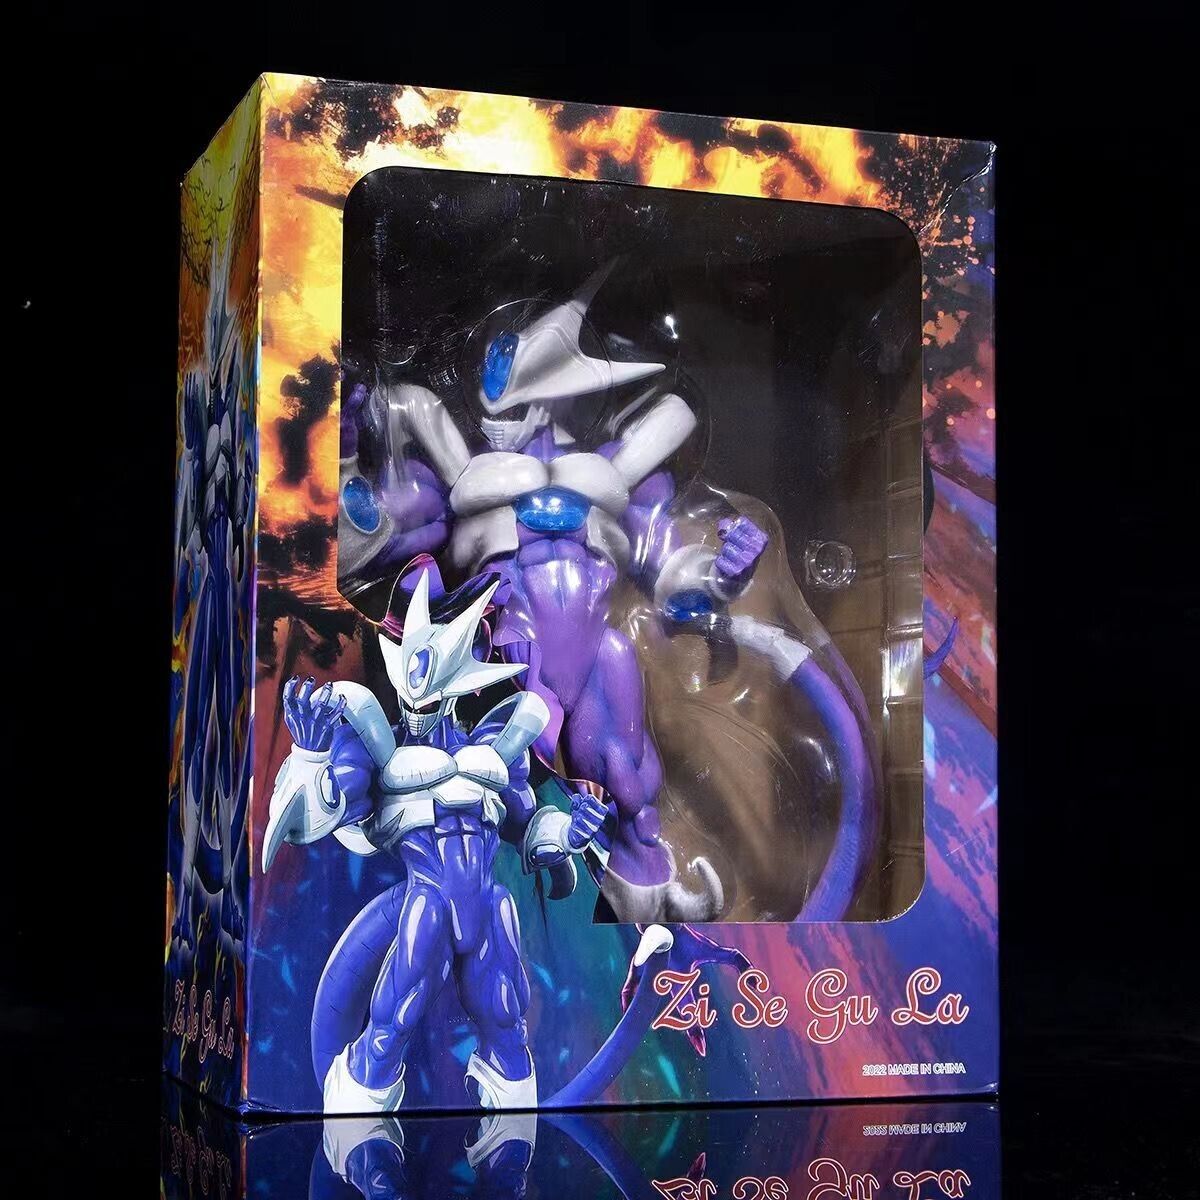 Anime Dragon Ball Z Cooler Action PVC Figure Model Statue Collection Toy